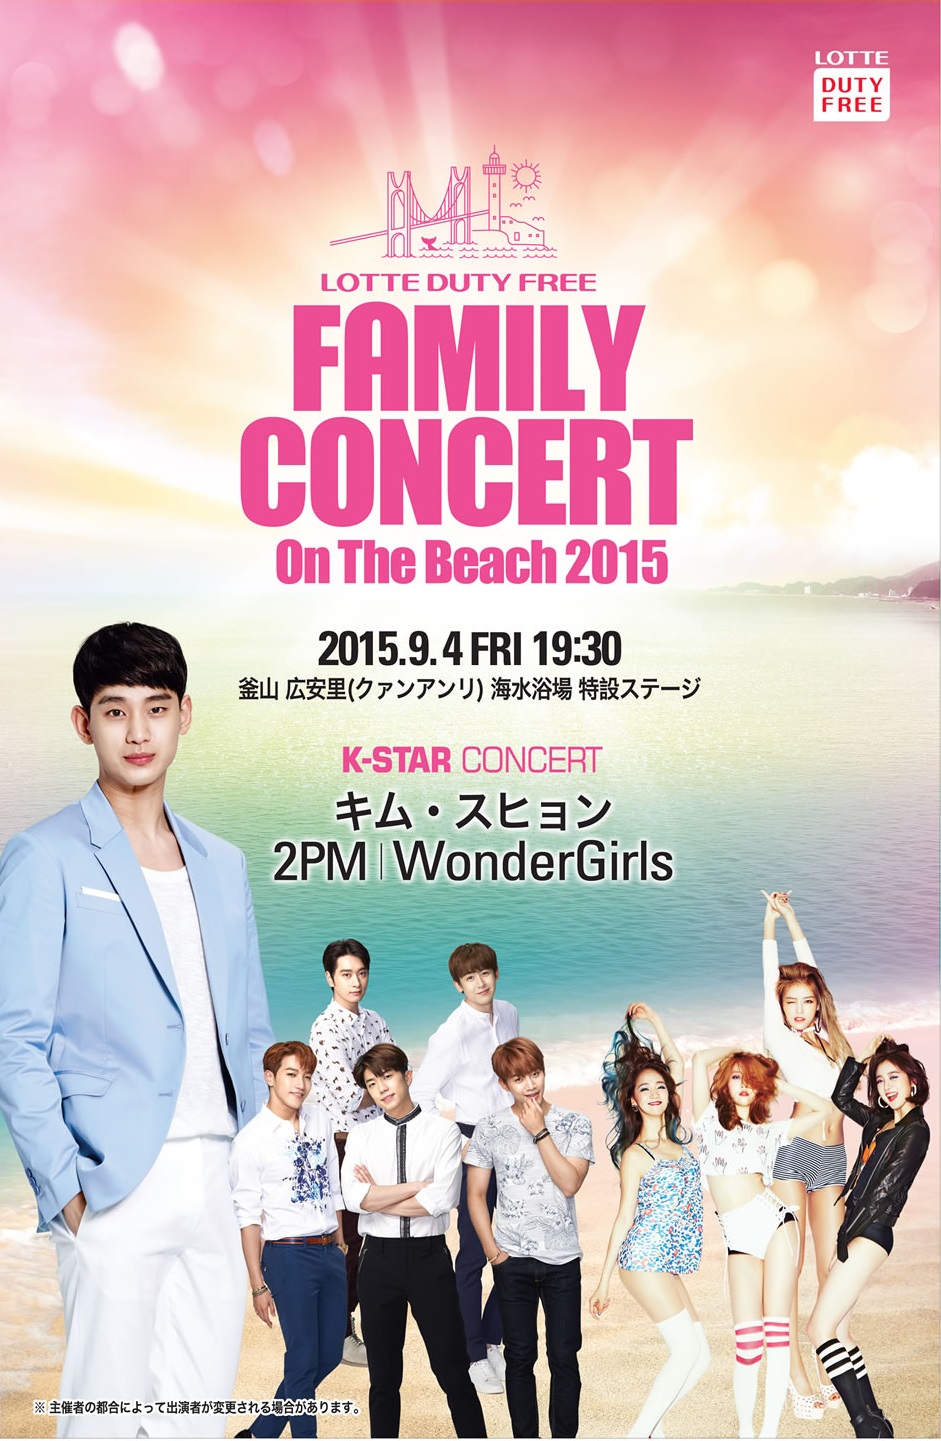 LOTTE FAMILY CONCERT ON THE BEACH 2015